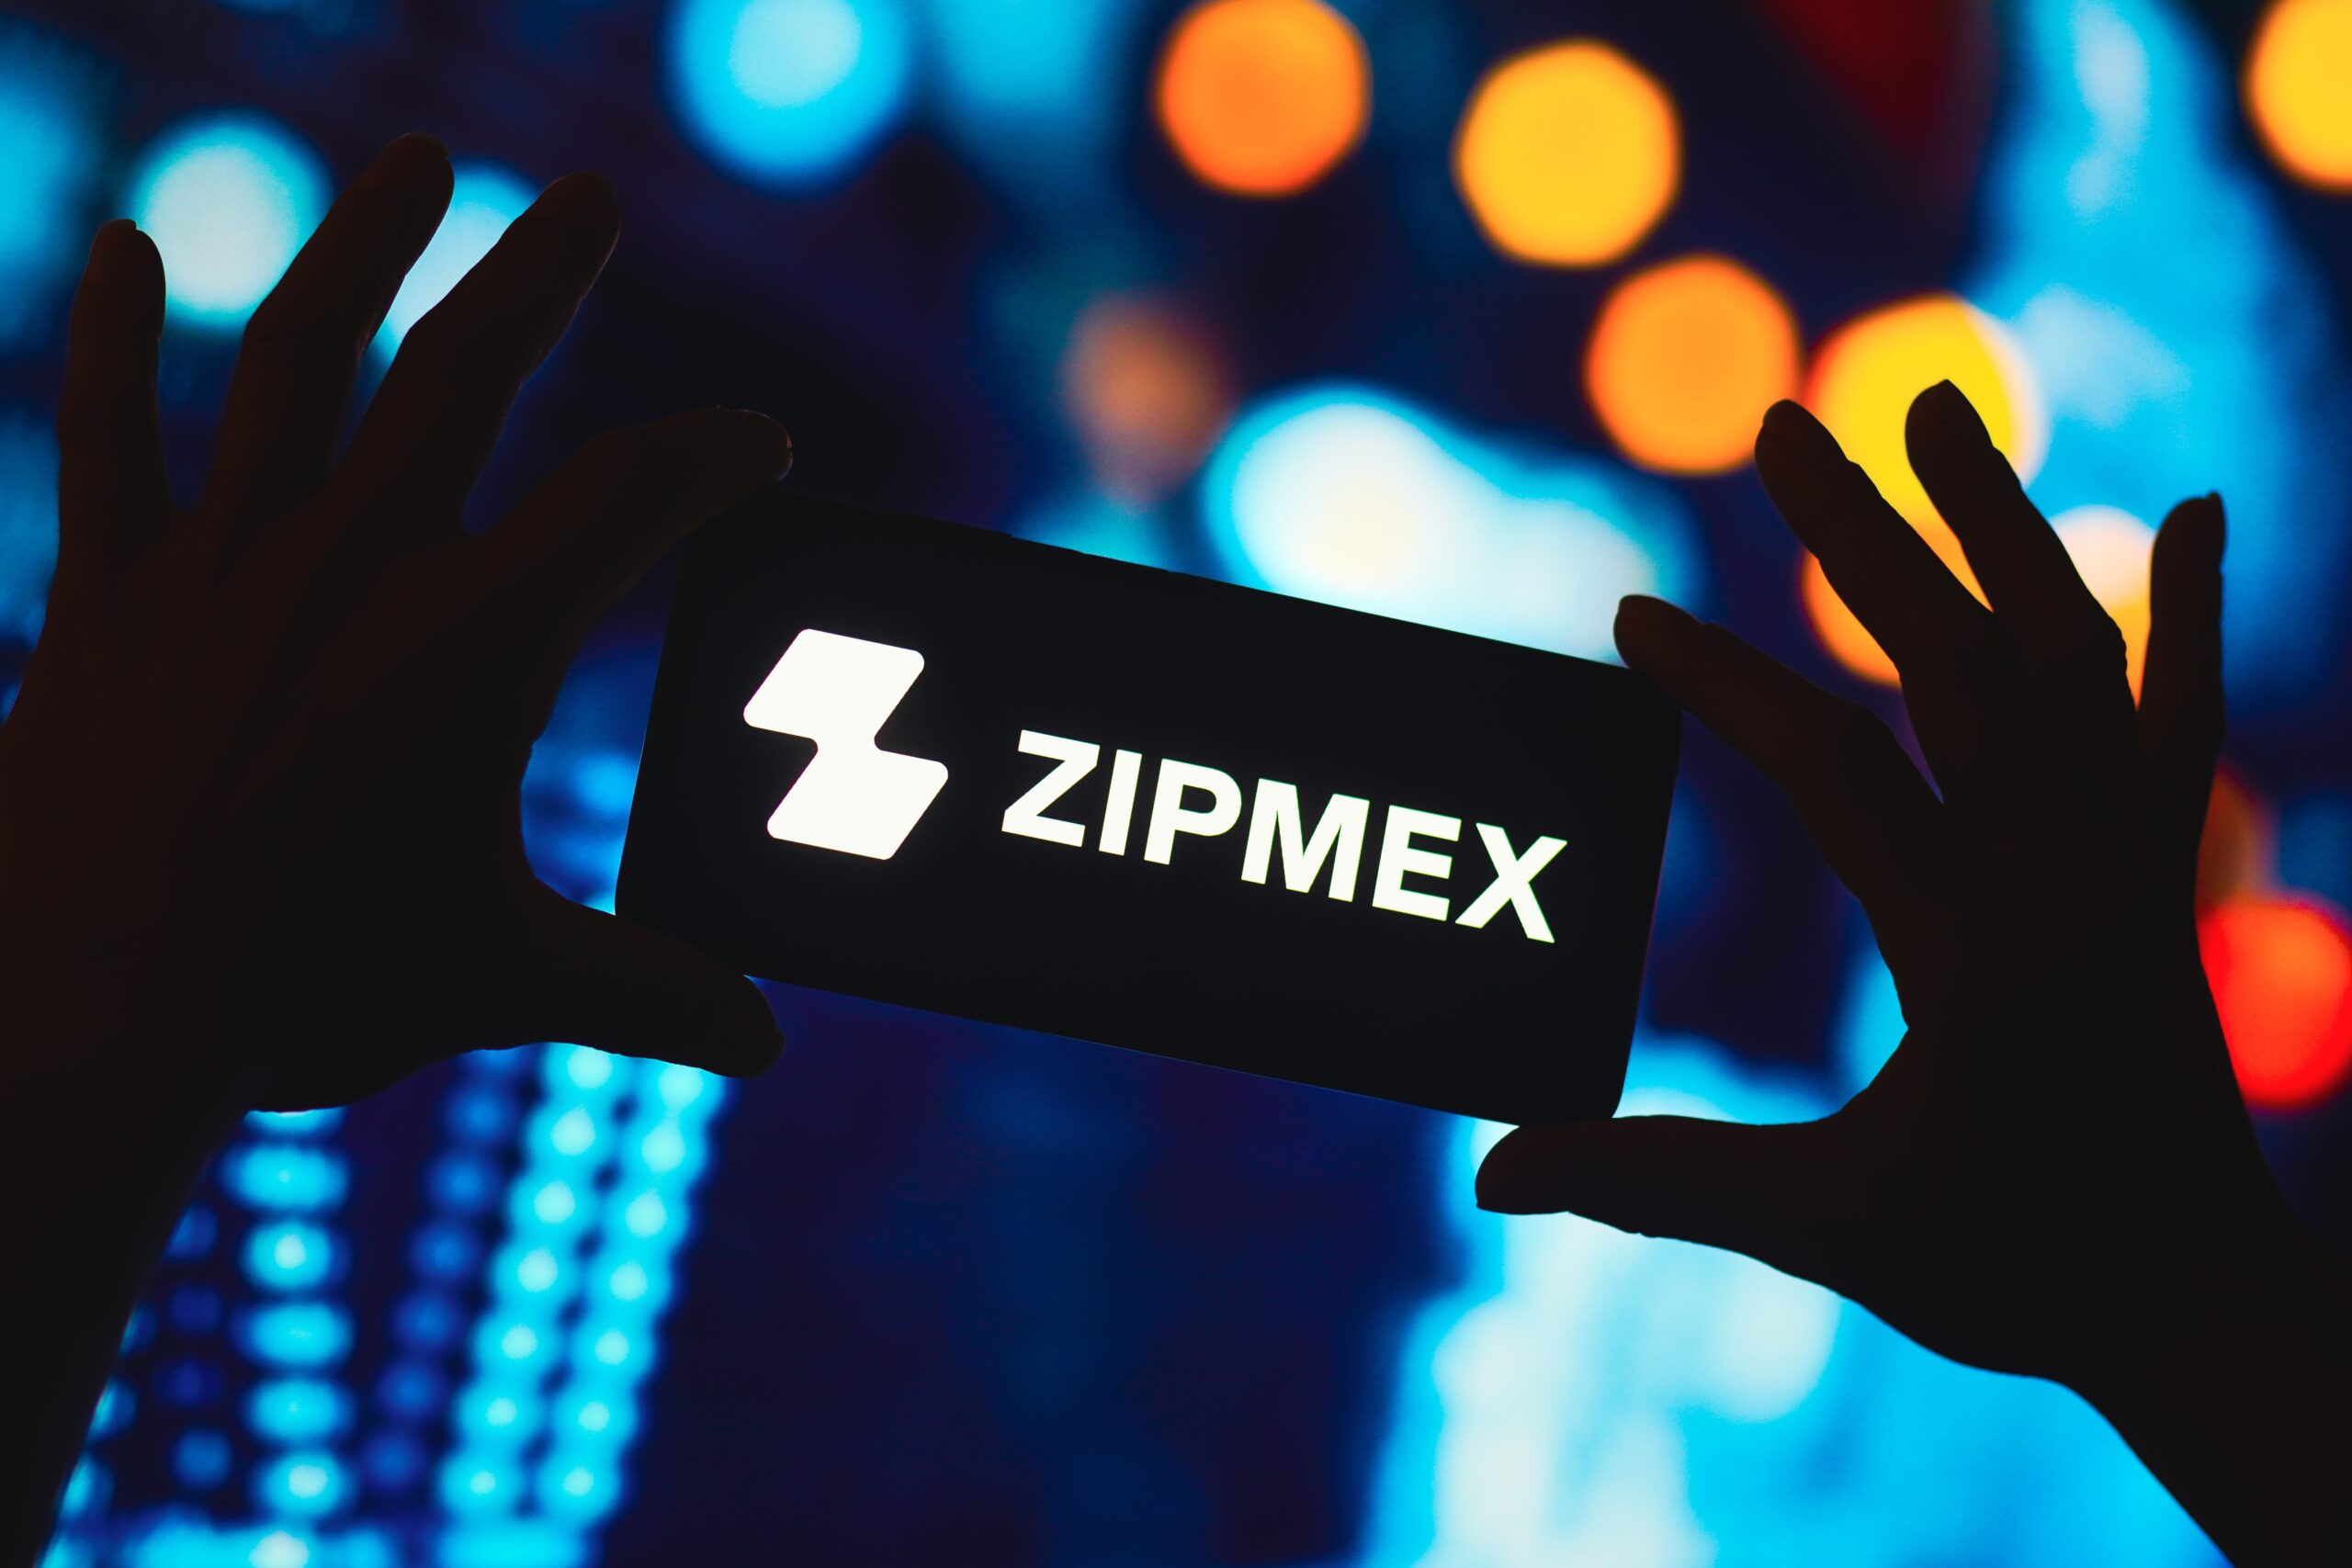 Thai SEC Takes Legal Action Against Former Zipmex CEO for Alleged Fraud